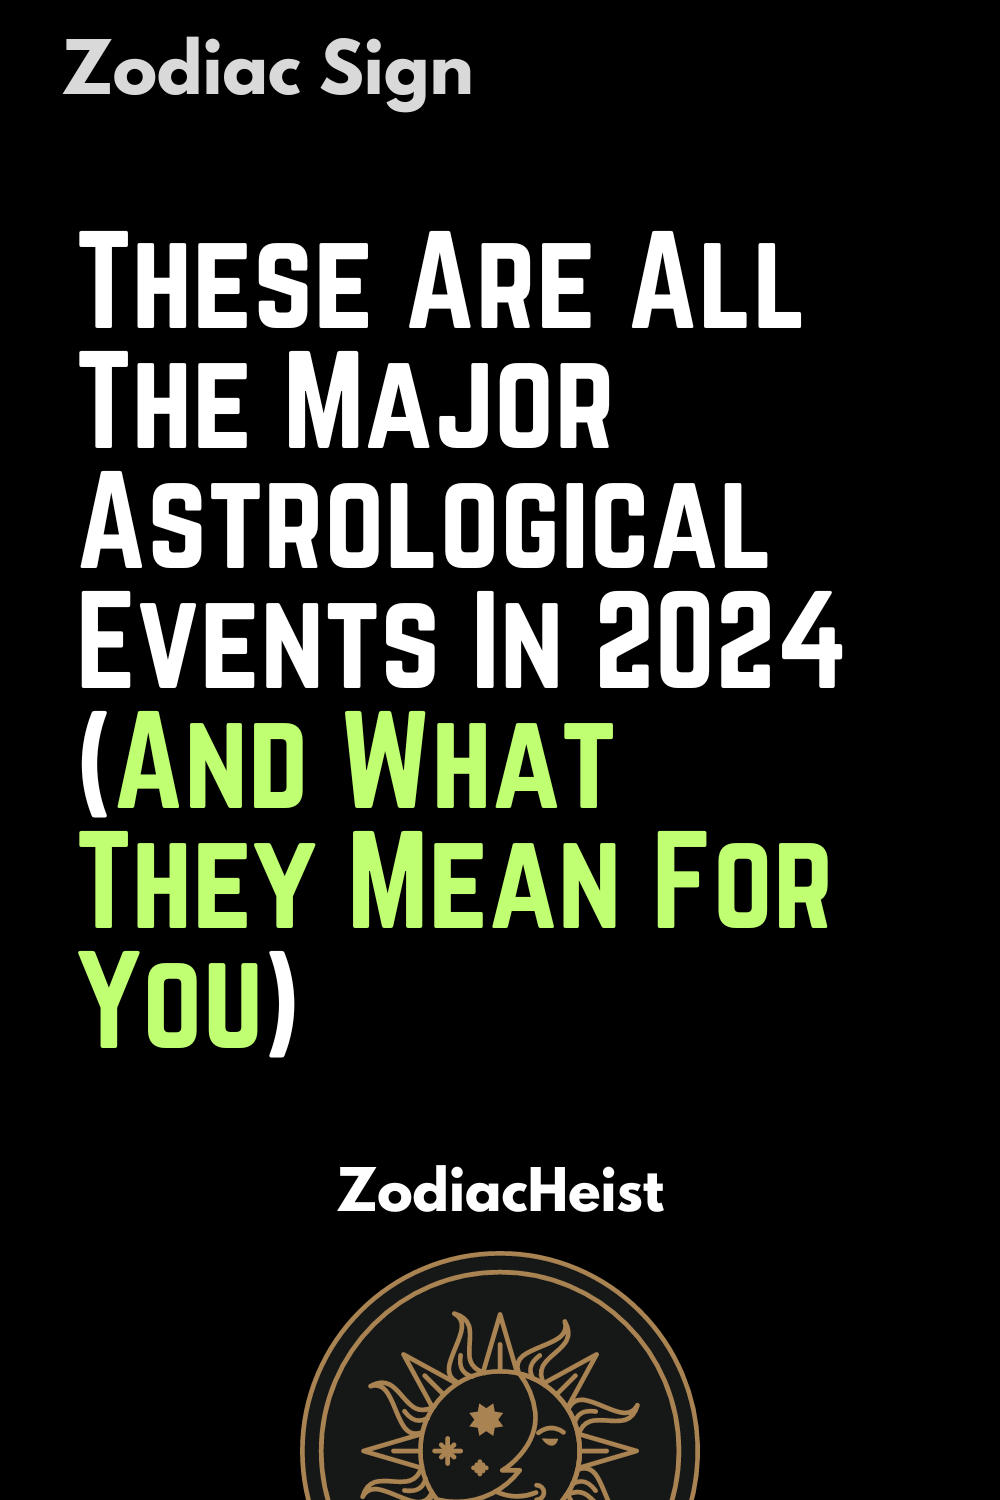 These Are All The Major Astrological Events In 2024 (And What They Mean